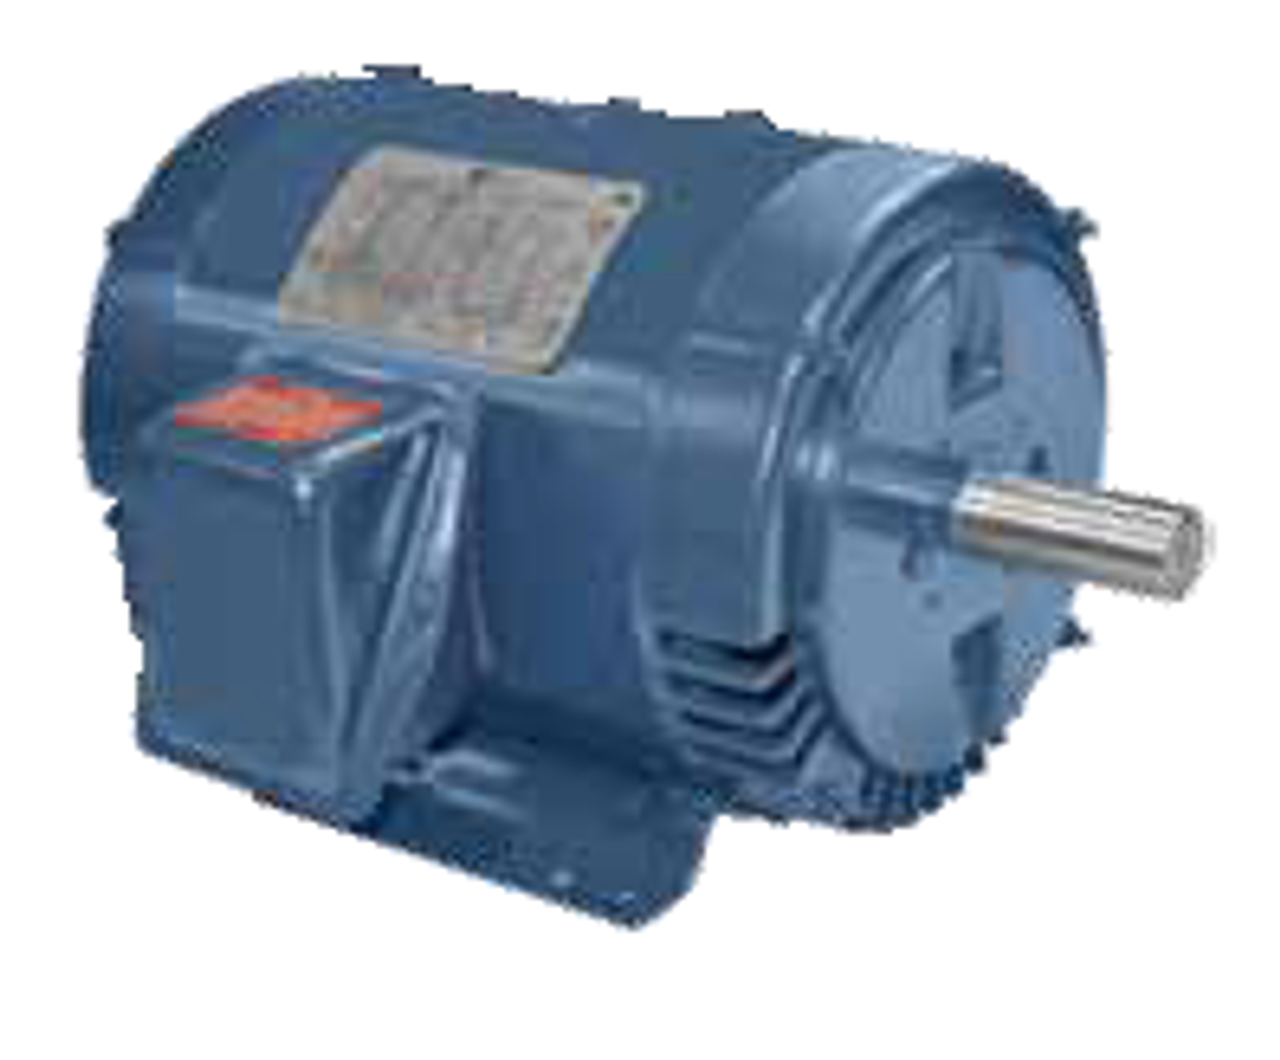 H869L Three Phase Totally Enclosed General Purpose Motor 3/4 HP